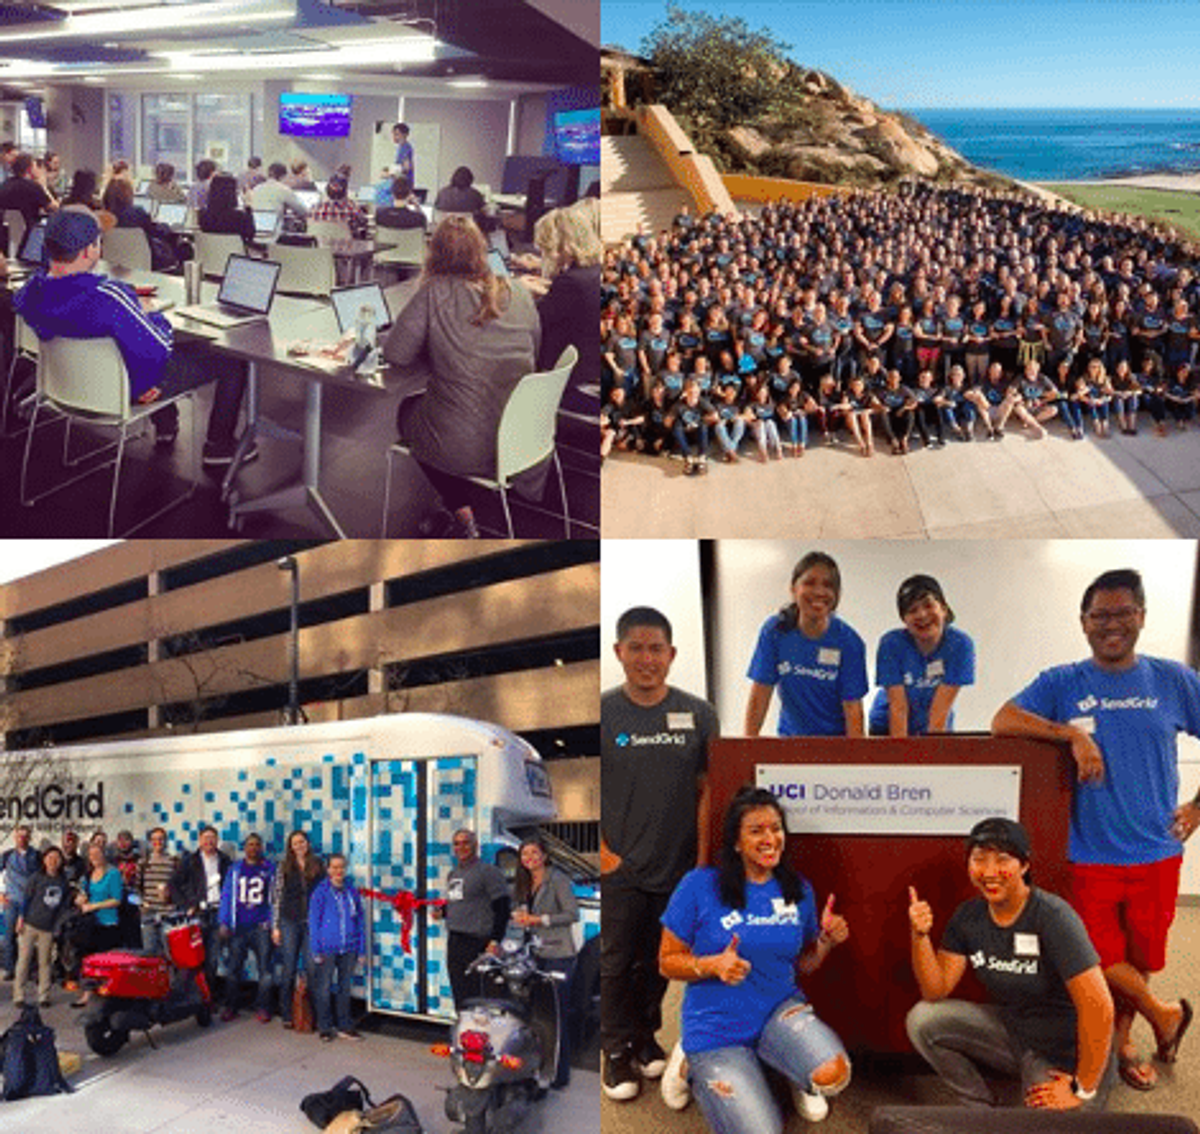 Our People, Our Story: Diversity and Inclusion at SendGrid